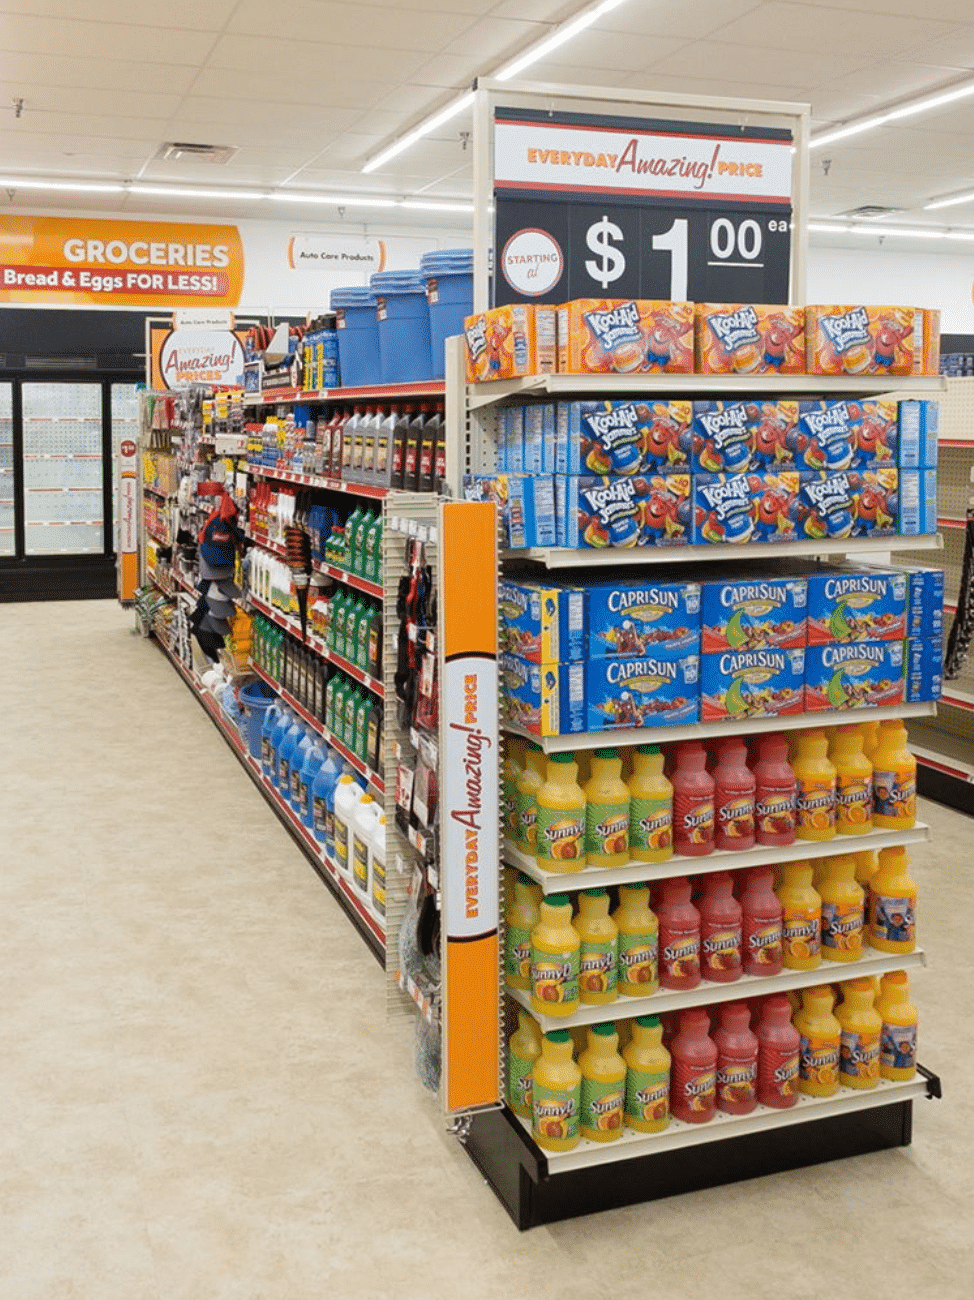 Picture illustrating an endcap retail store layout